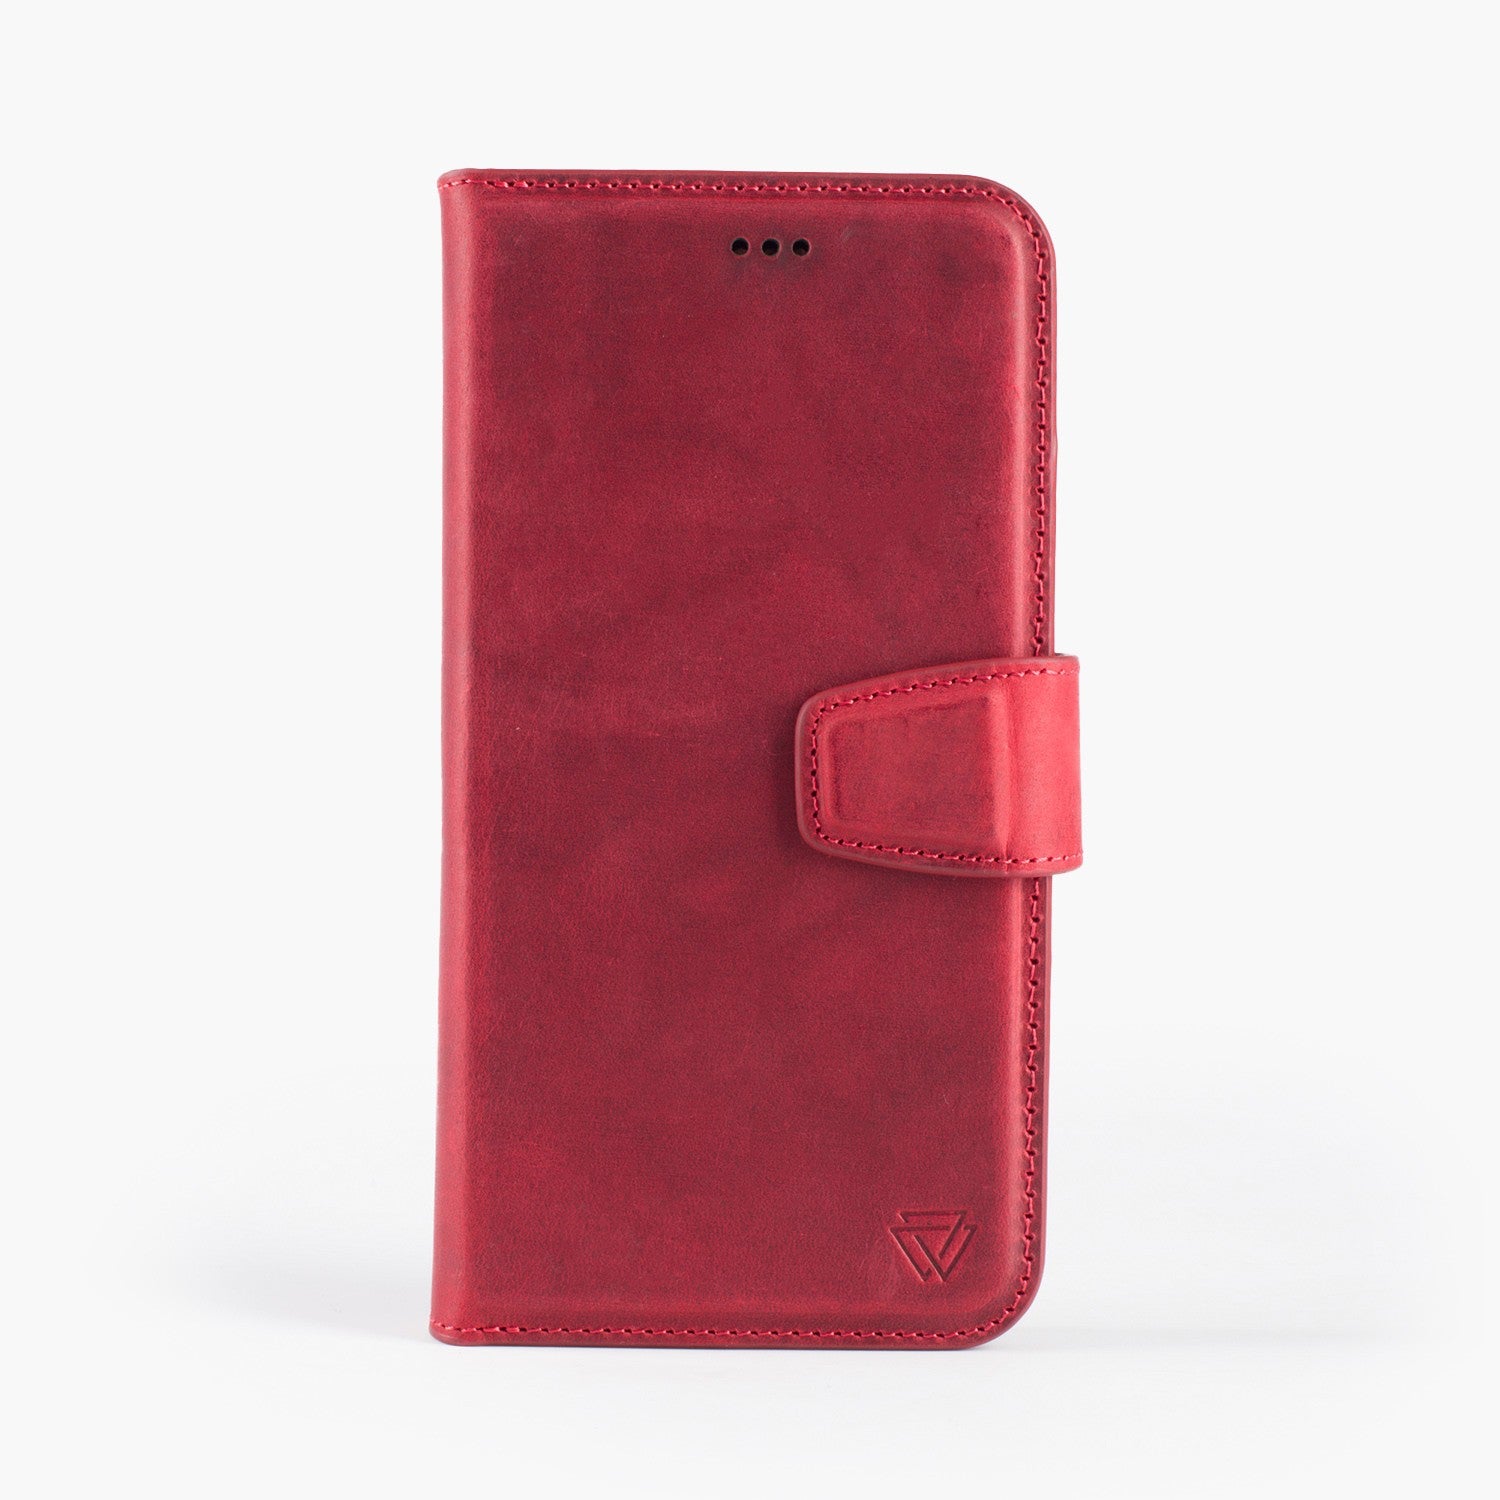 Wachikopa leather Magic Book Case 2 in 1 for iPhone 11 Pro Red